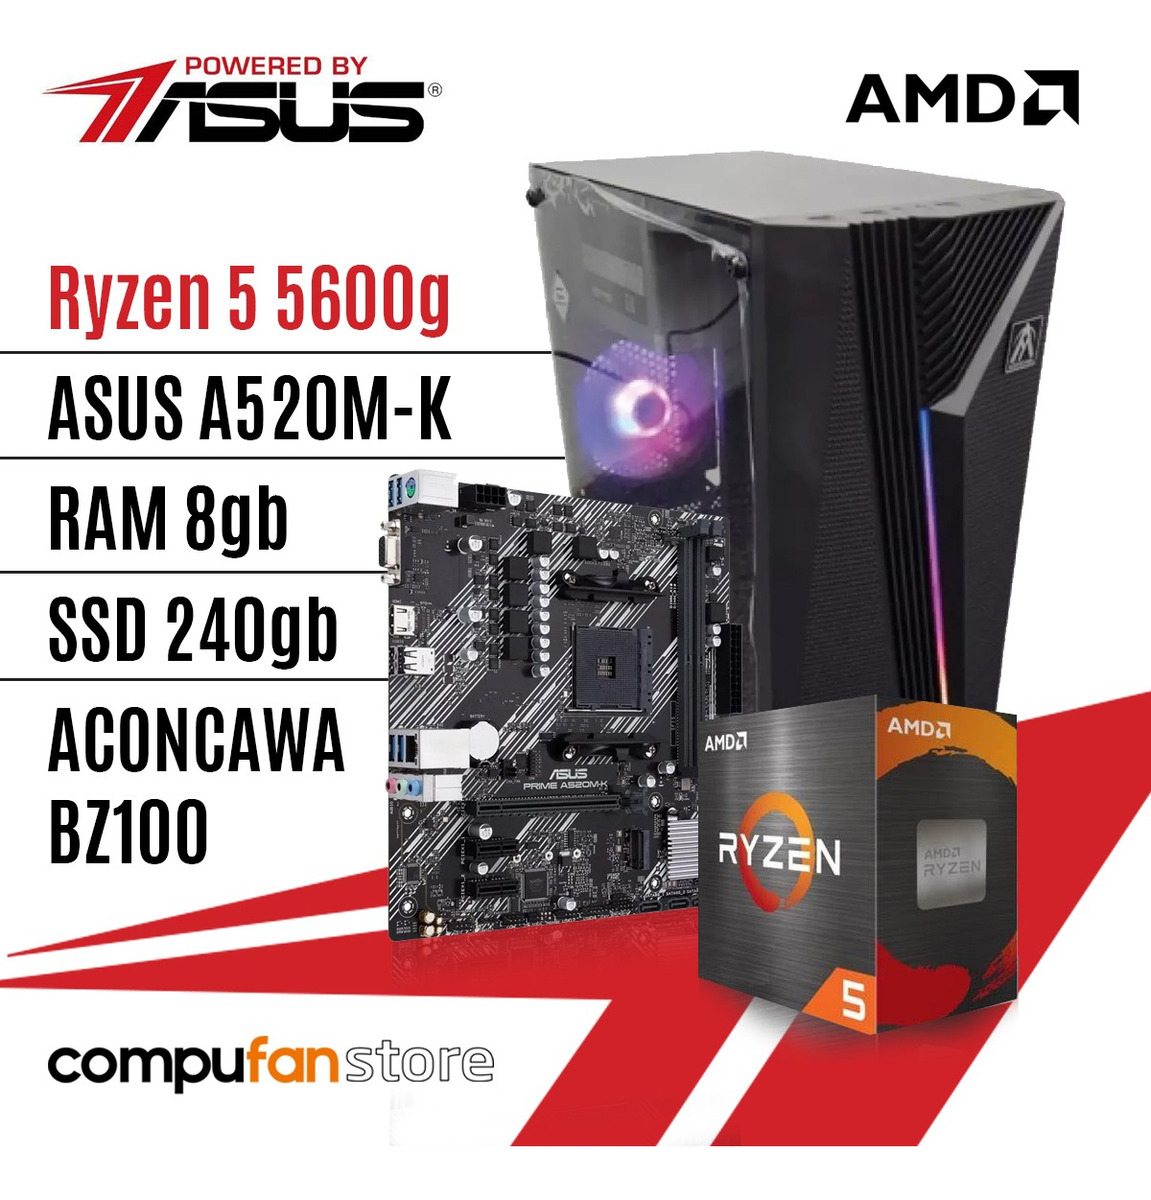 Pc Gamer Powered By Asus Ryzen 5 5600g A520m-k 8gb